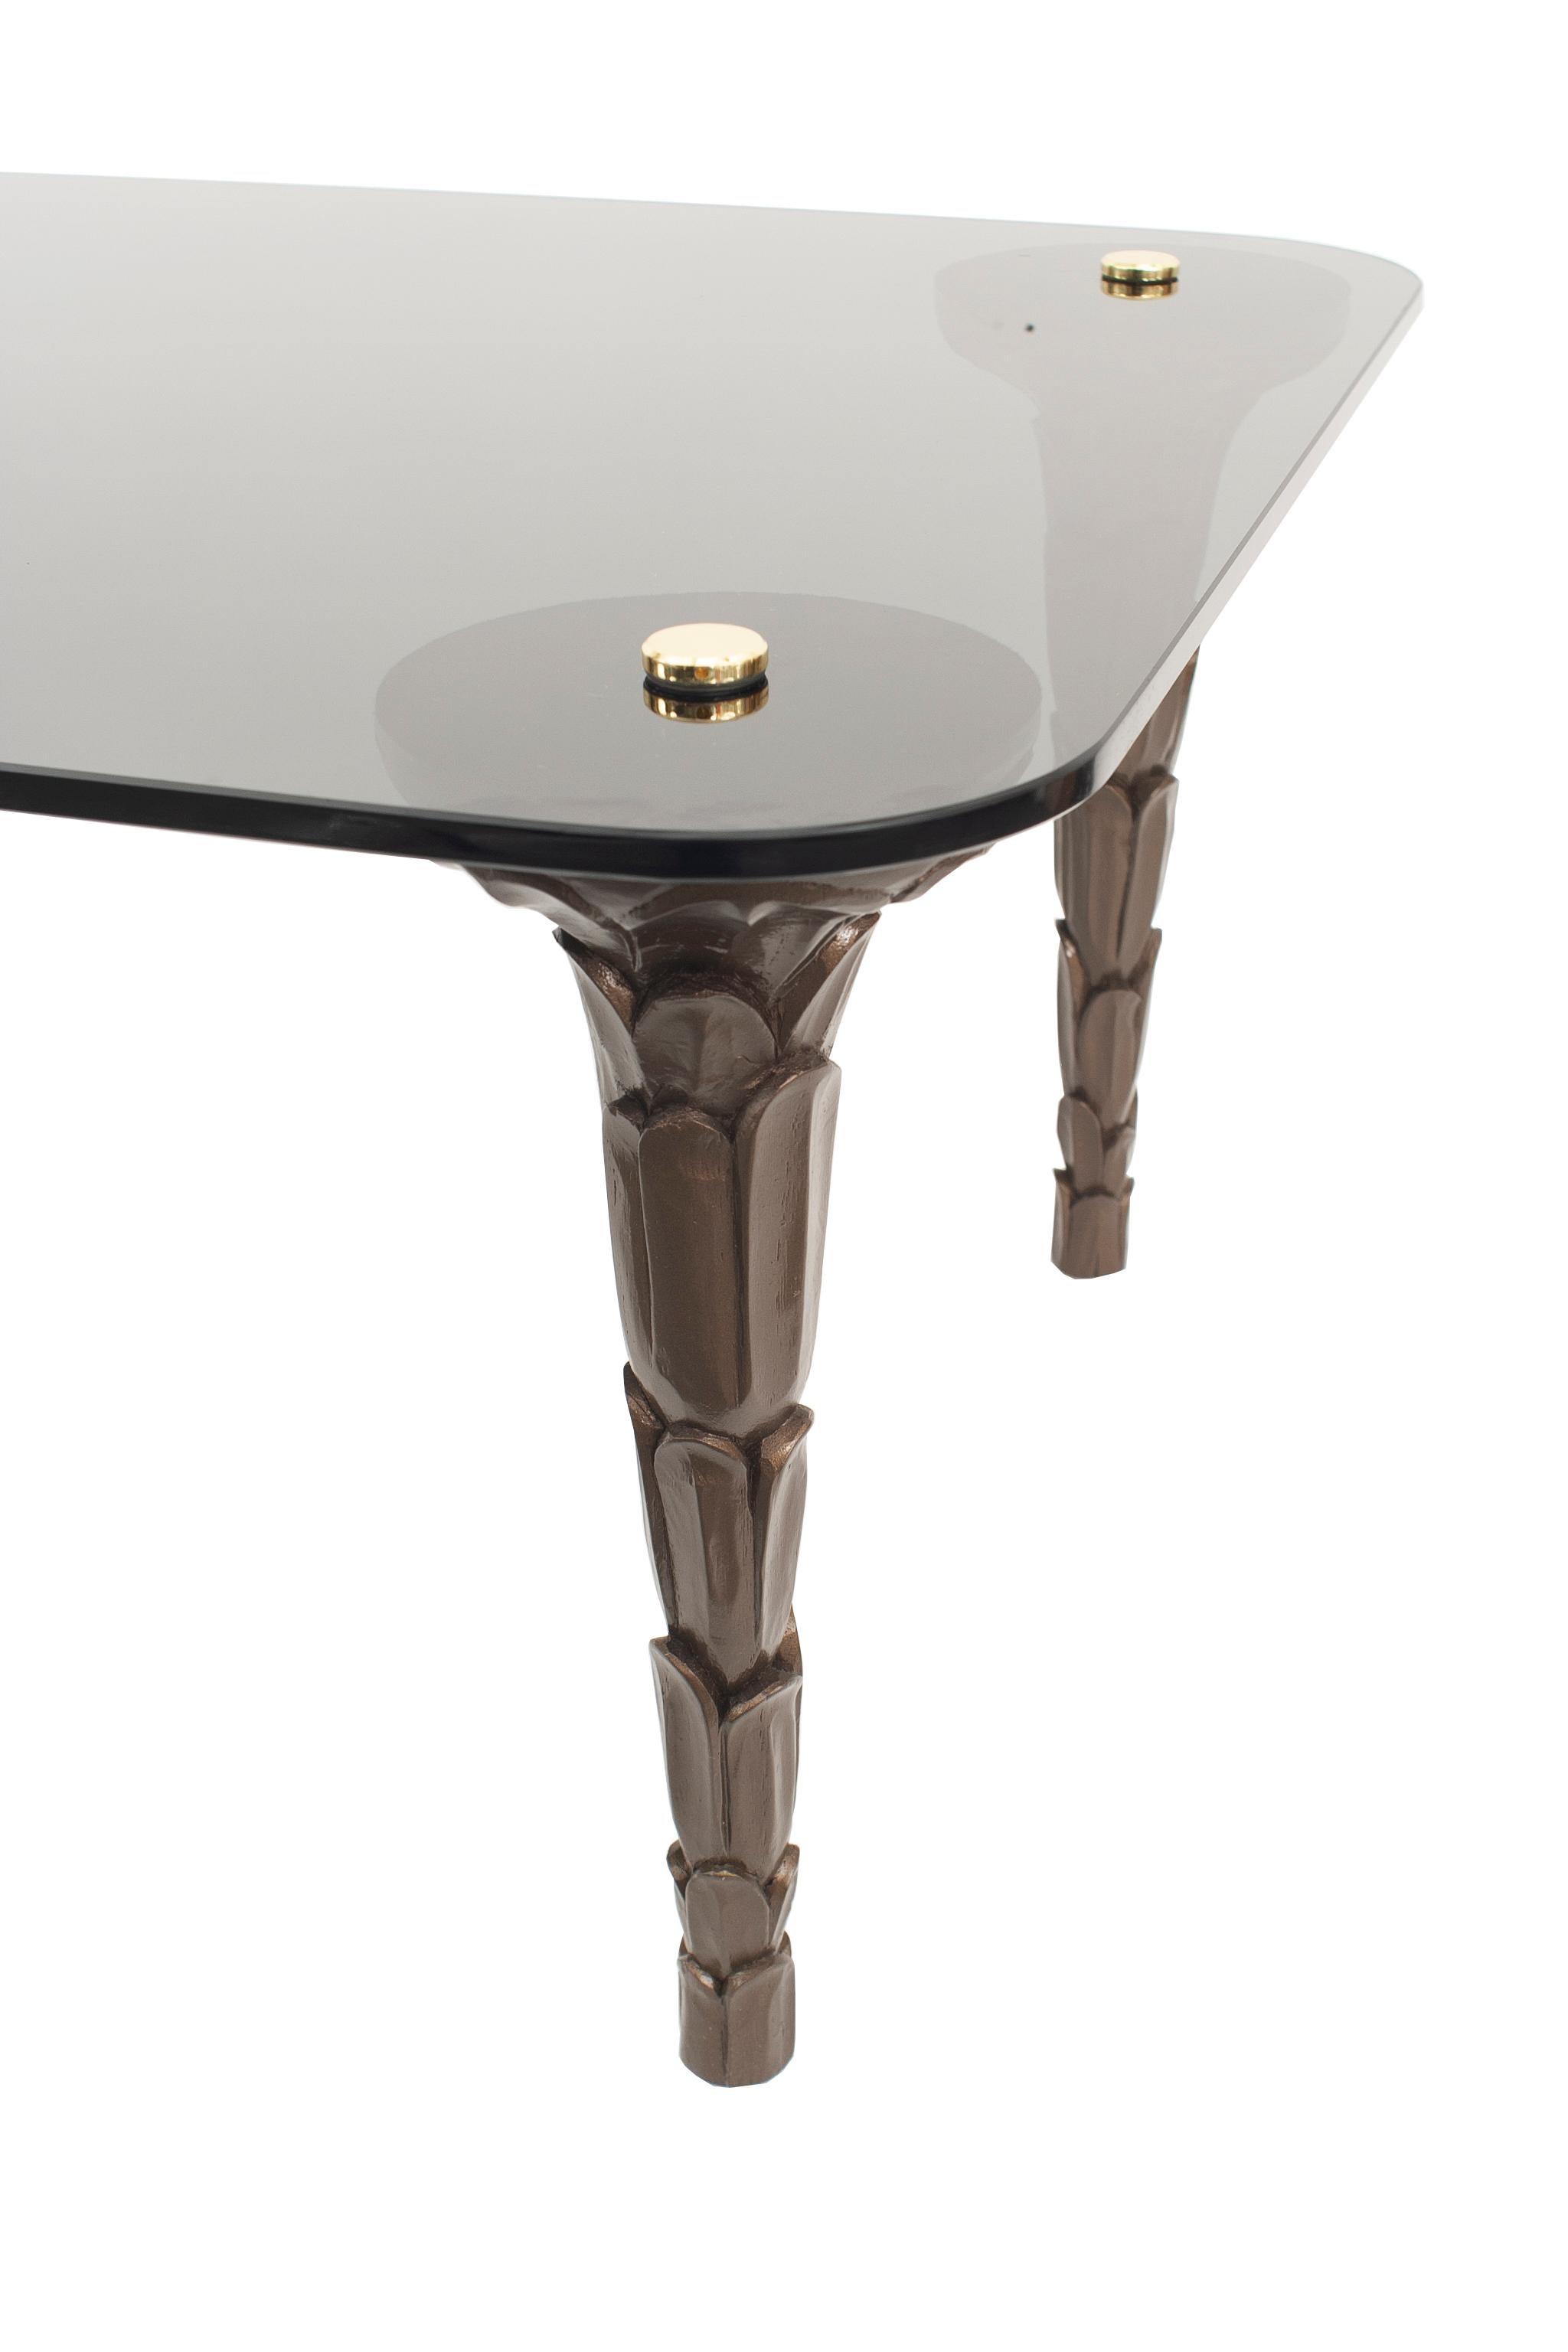 Contemporary Regency style coffee table with dark grey carved palm legs and smoked grey glass top secured with flat brass finials. 

Can be made custom size and colors.
   